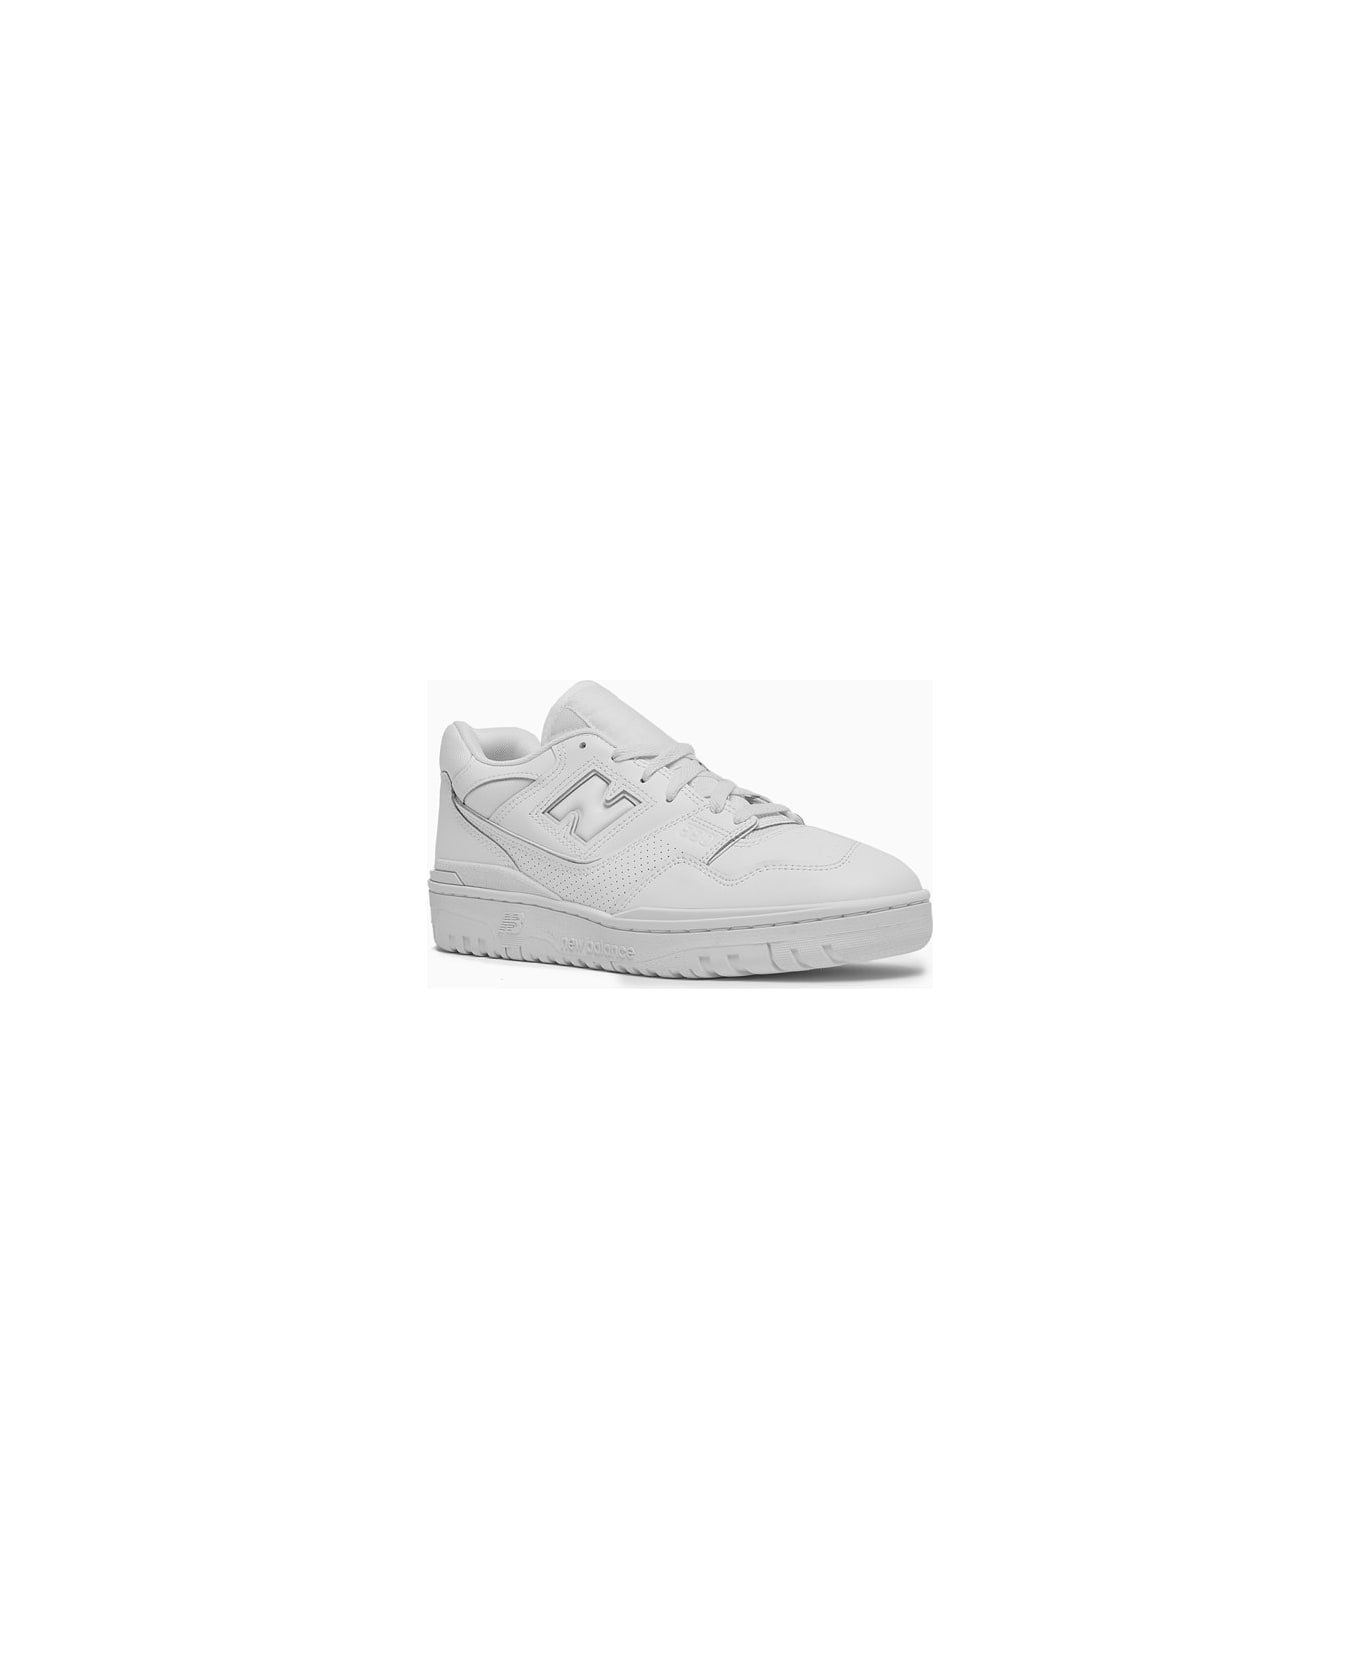 New Balance Sneakers Gsb550ww Gs - WHITE